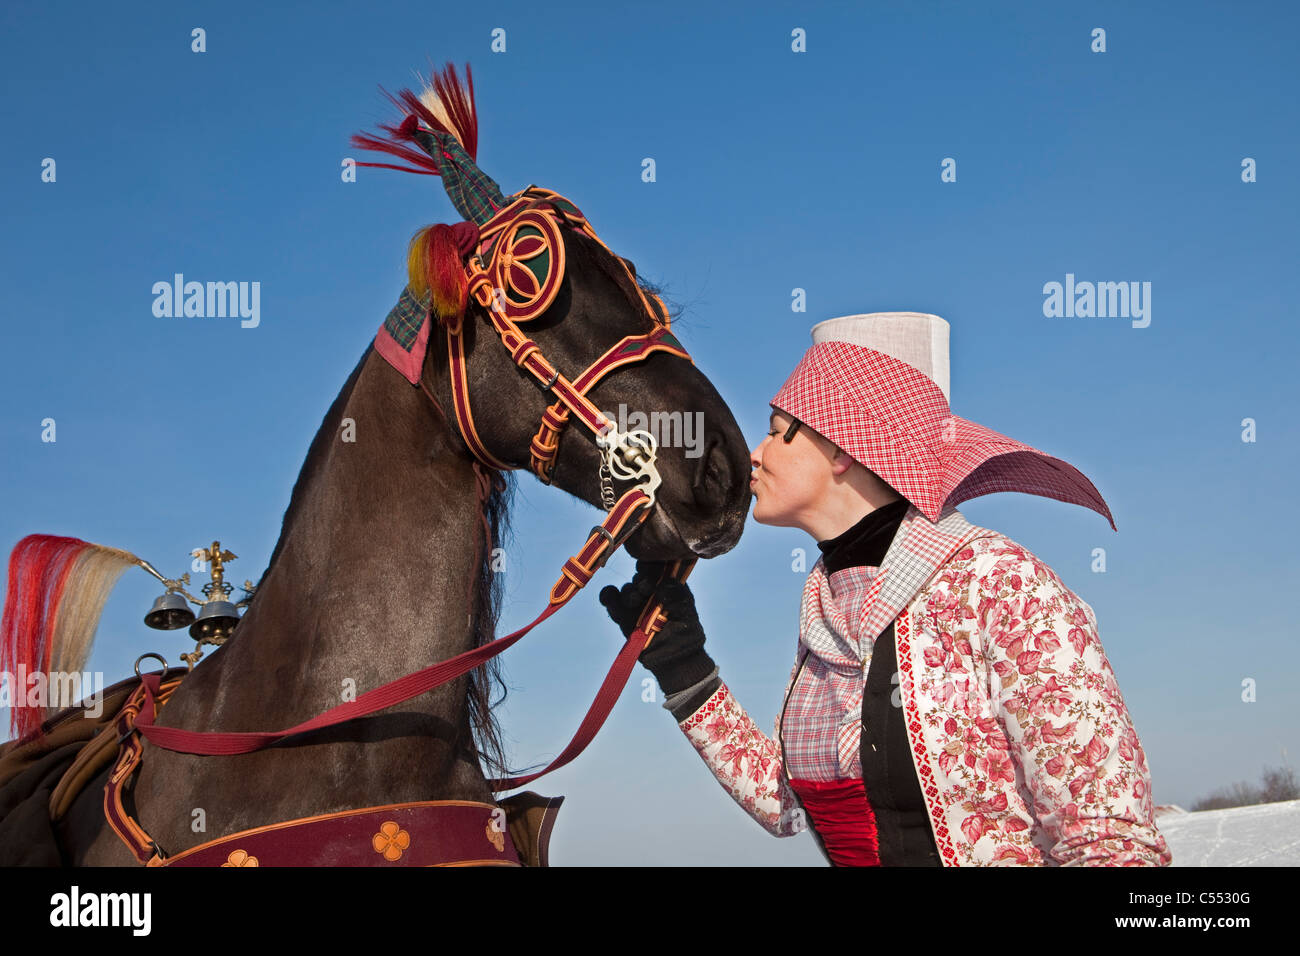 The Netherlands, Hindeloopen, Woman in traditional costume giving kiss on nose of Friesian horse. Stock Photo